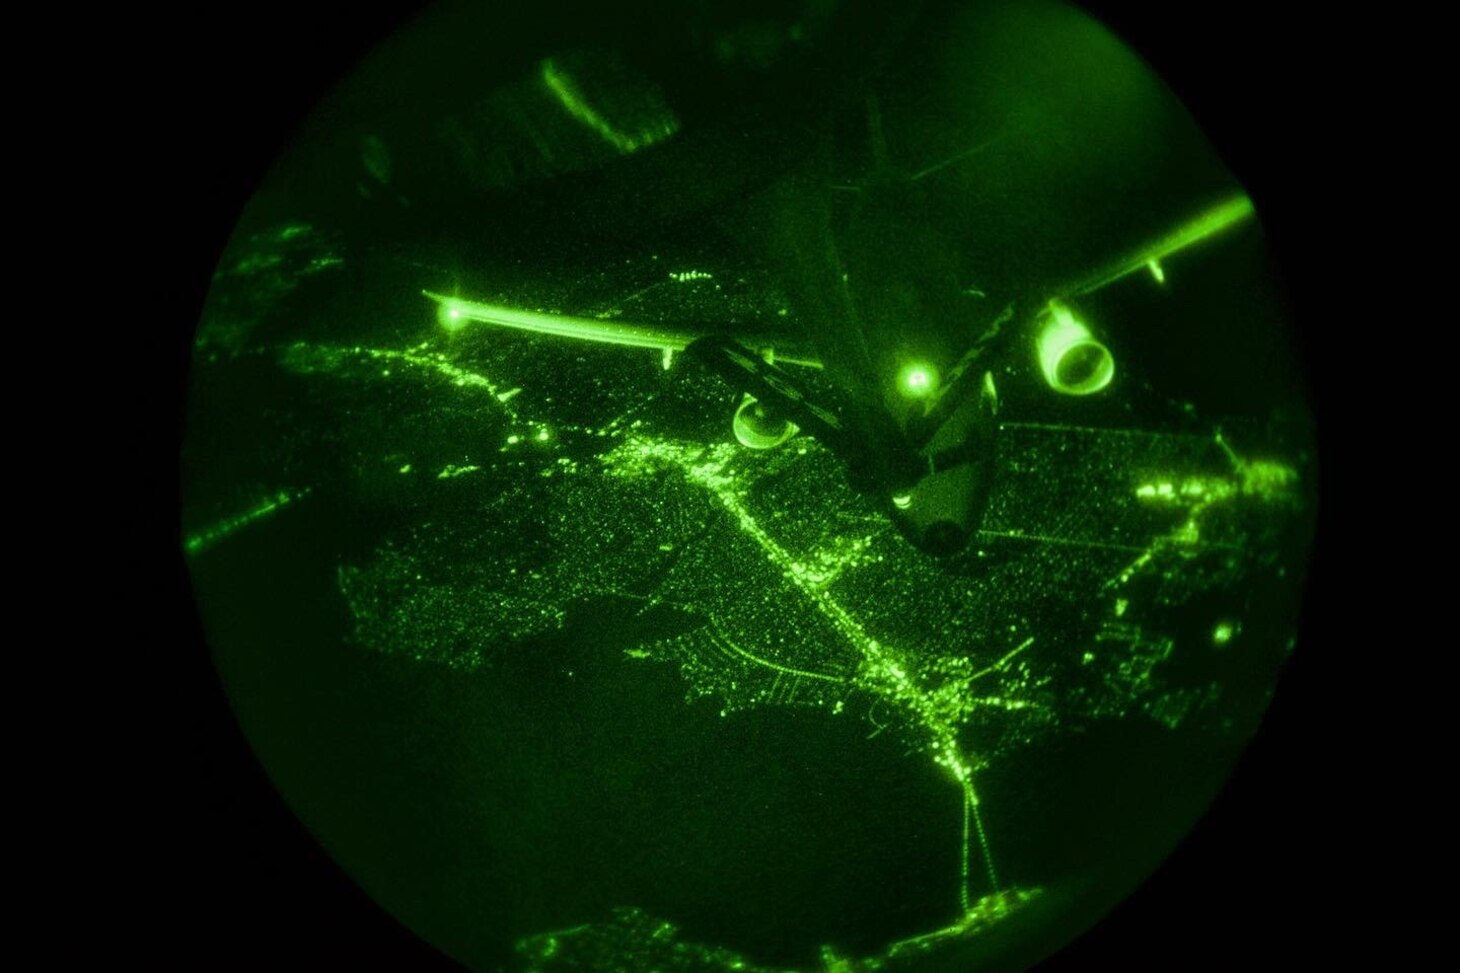 Seen on a night vision scope, a military aircraft approaches the refueling boom of another aircraft.